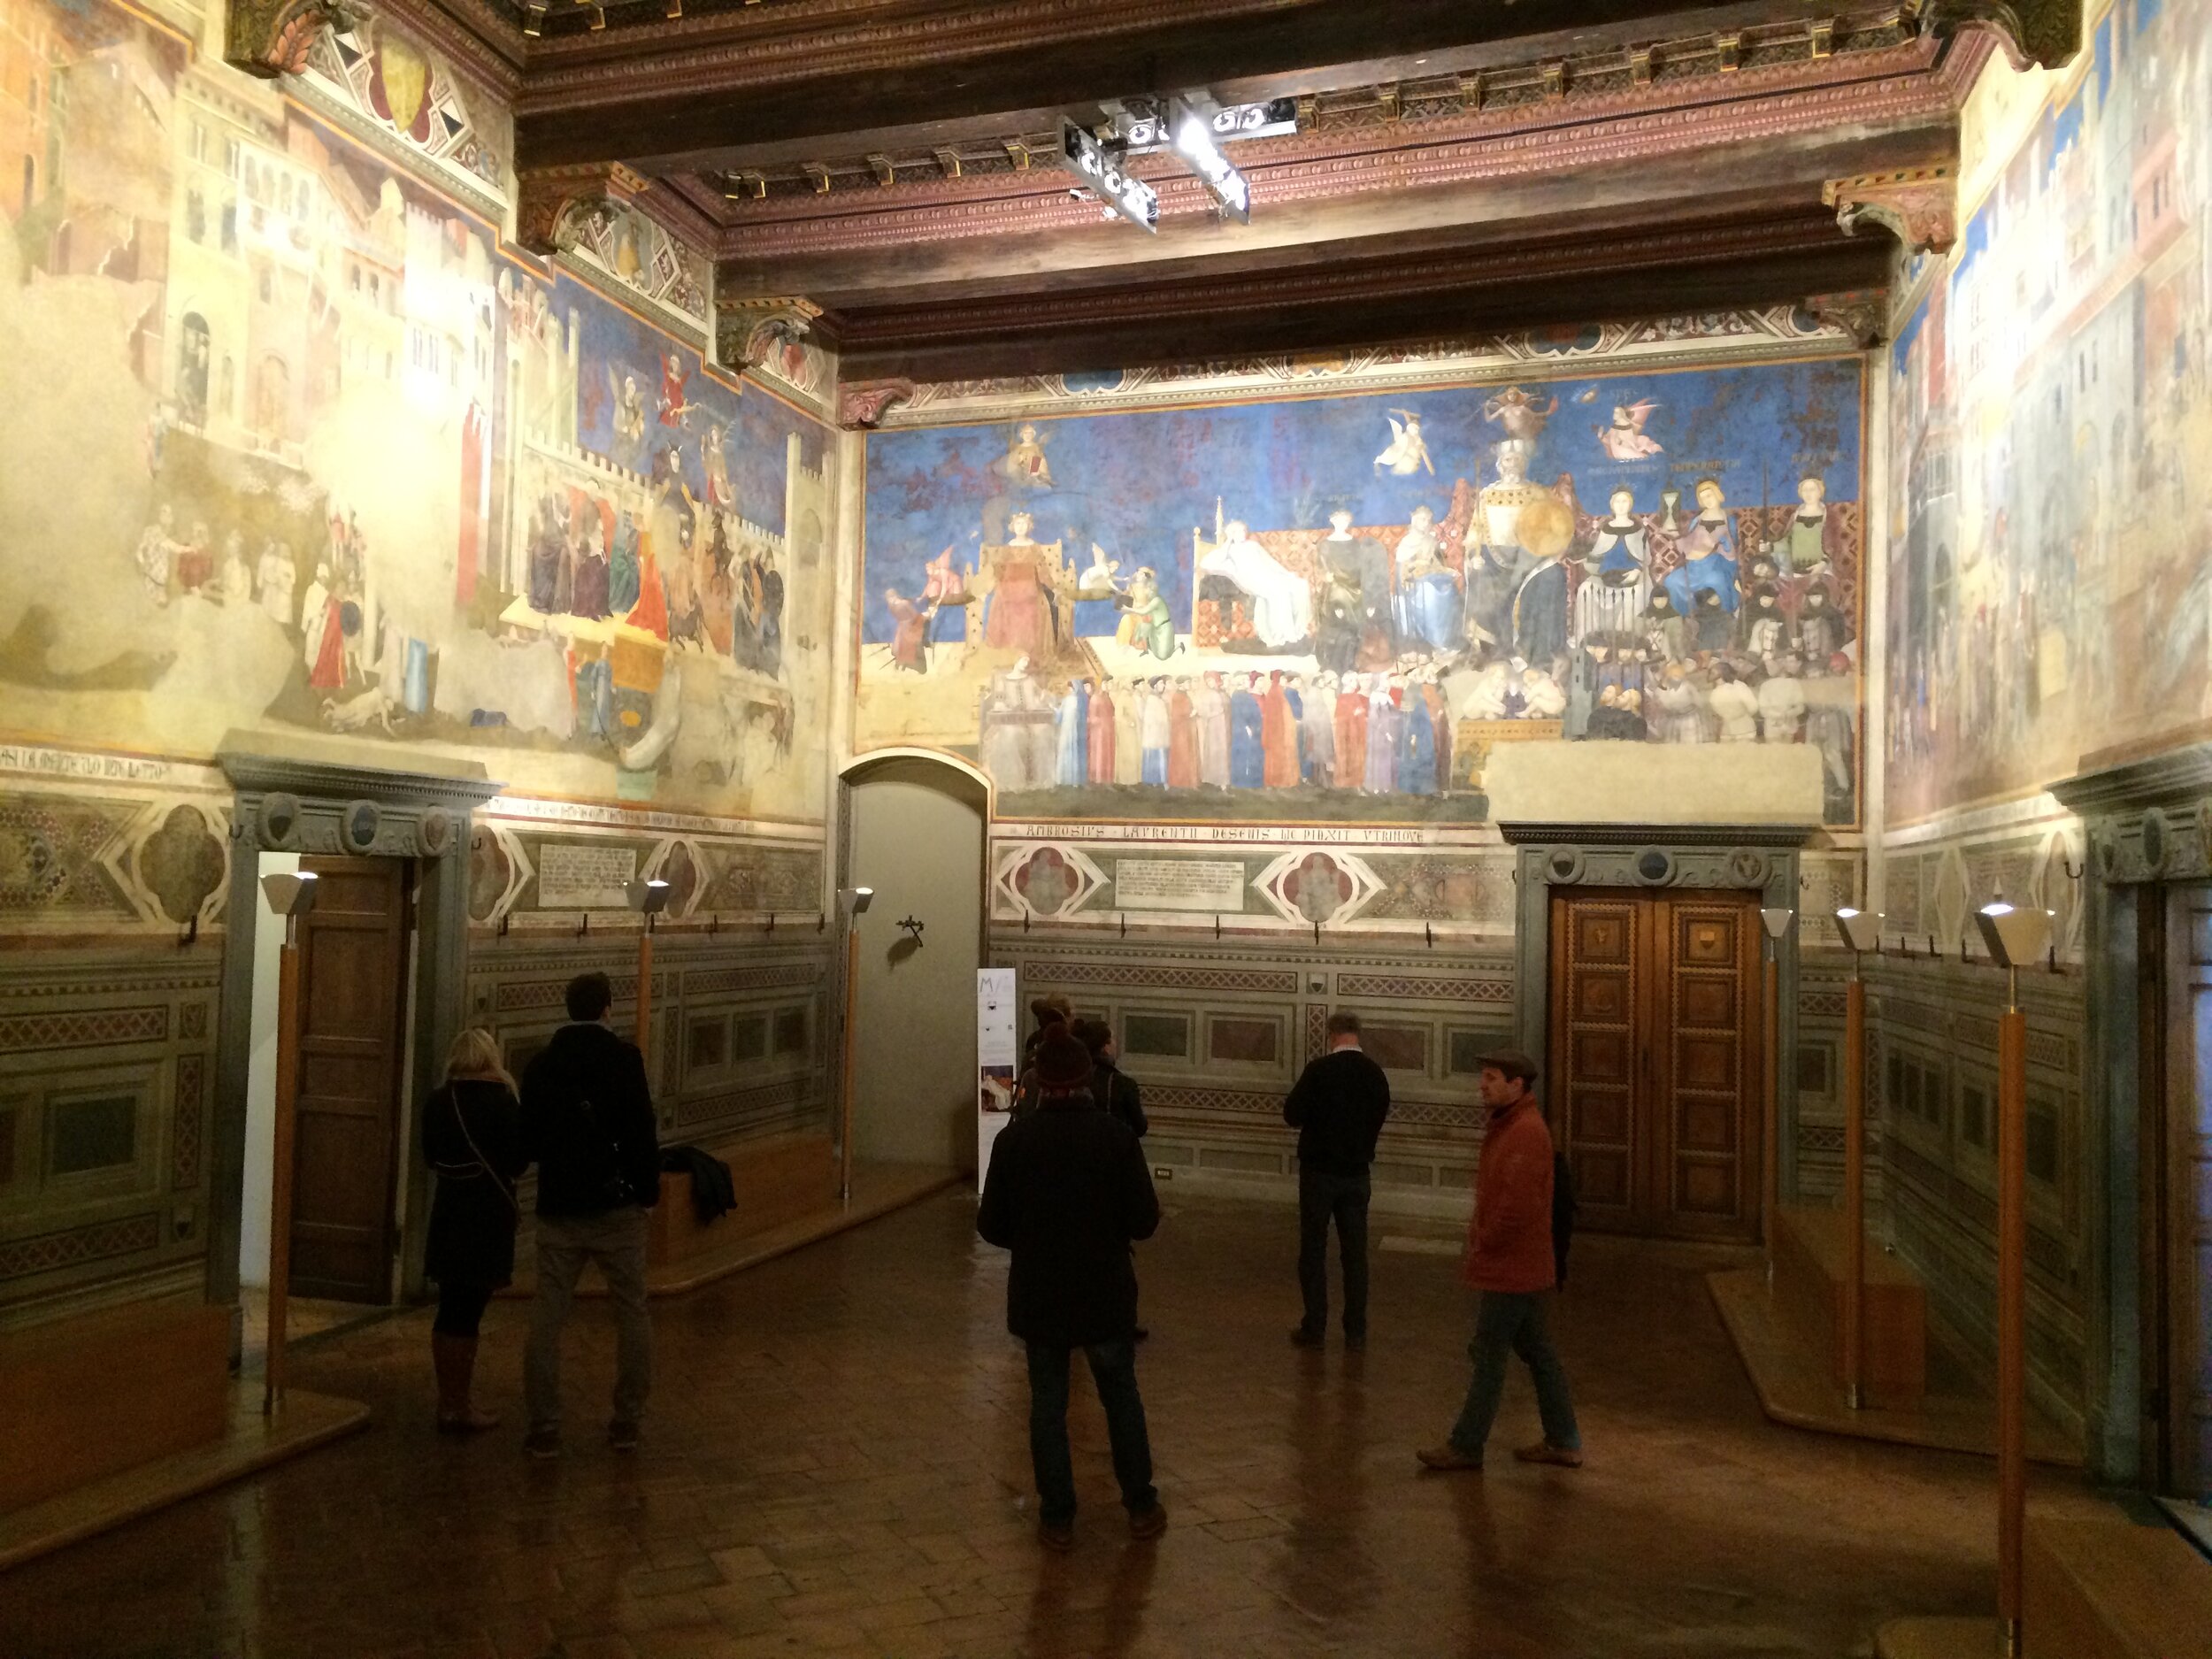  In January we have the Sala dei Nove in the Siena palazzo pubblico, with Lorenzetti’s frescoes of good and bad government, all to ourselves. 